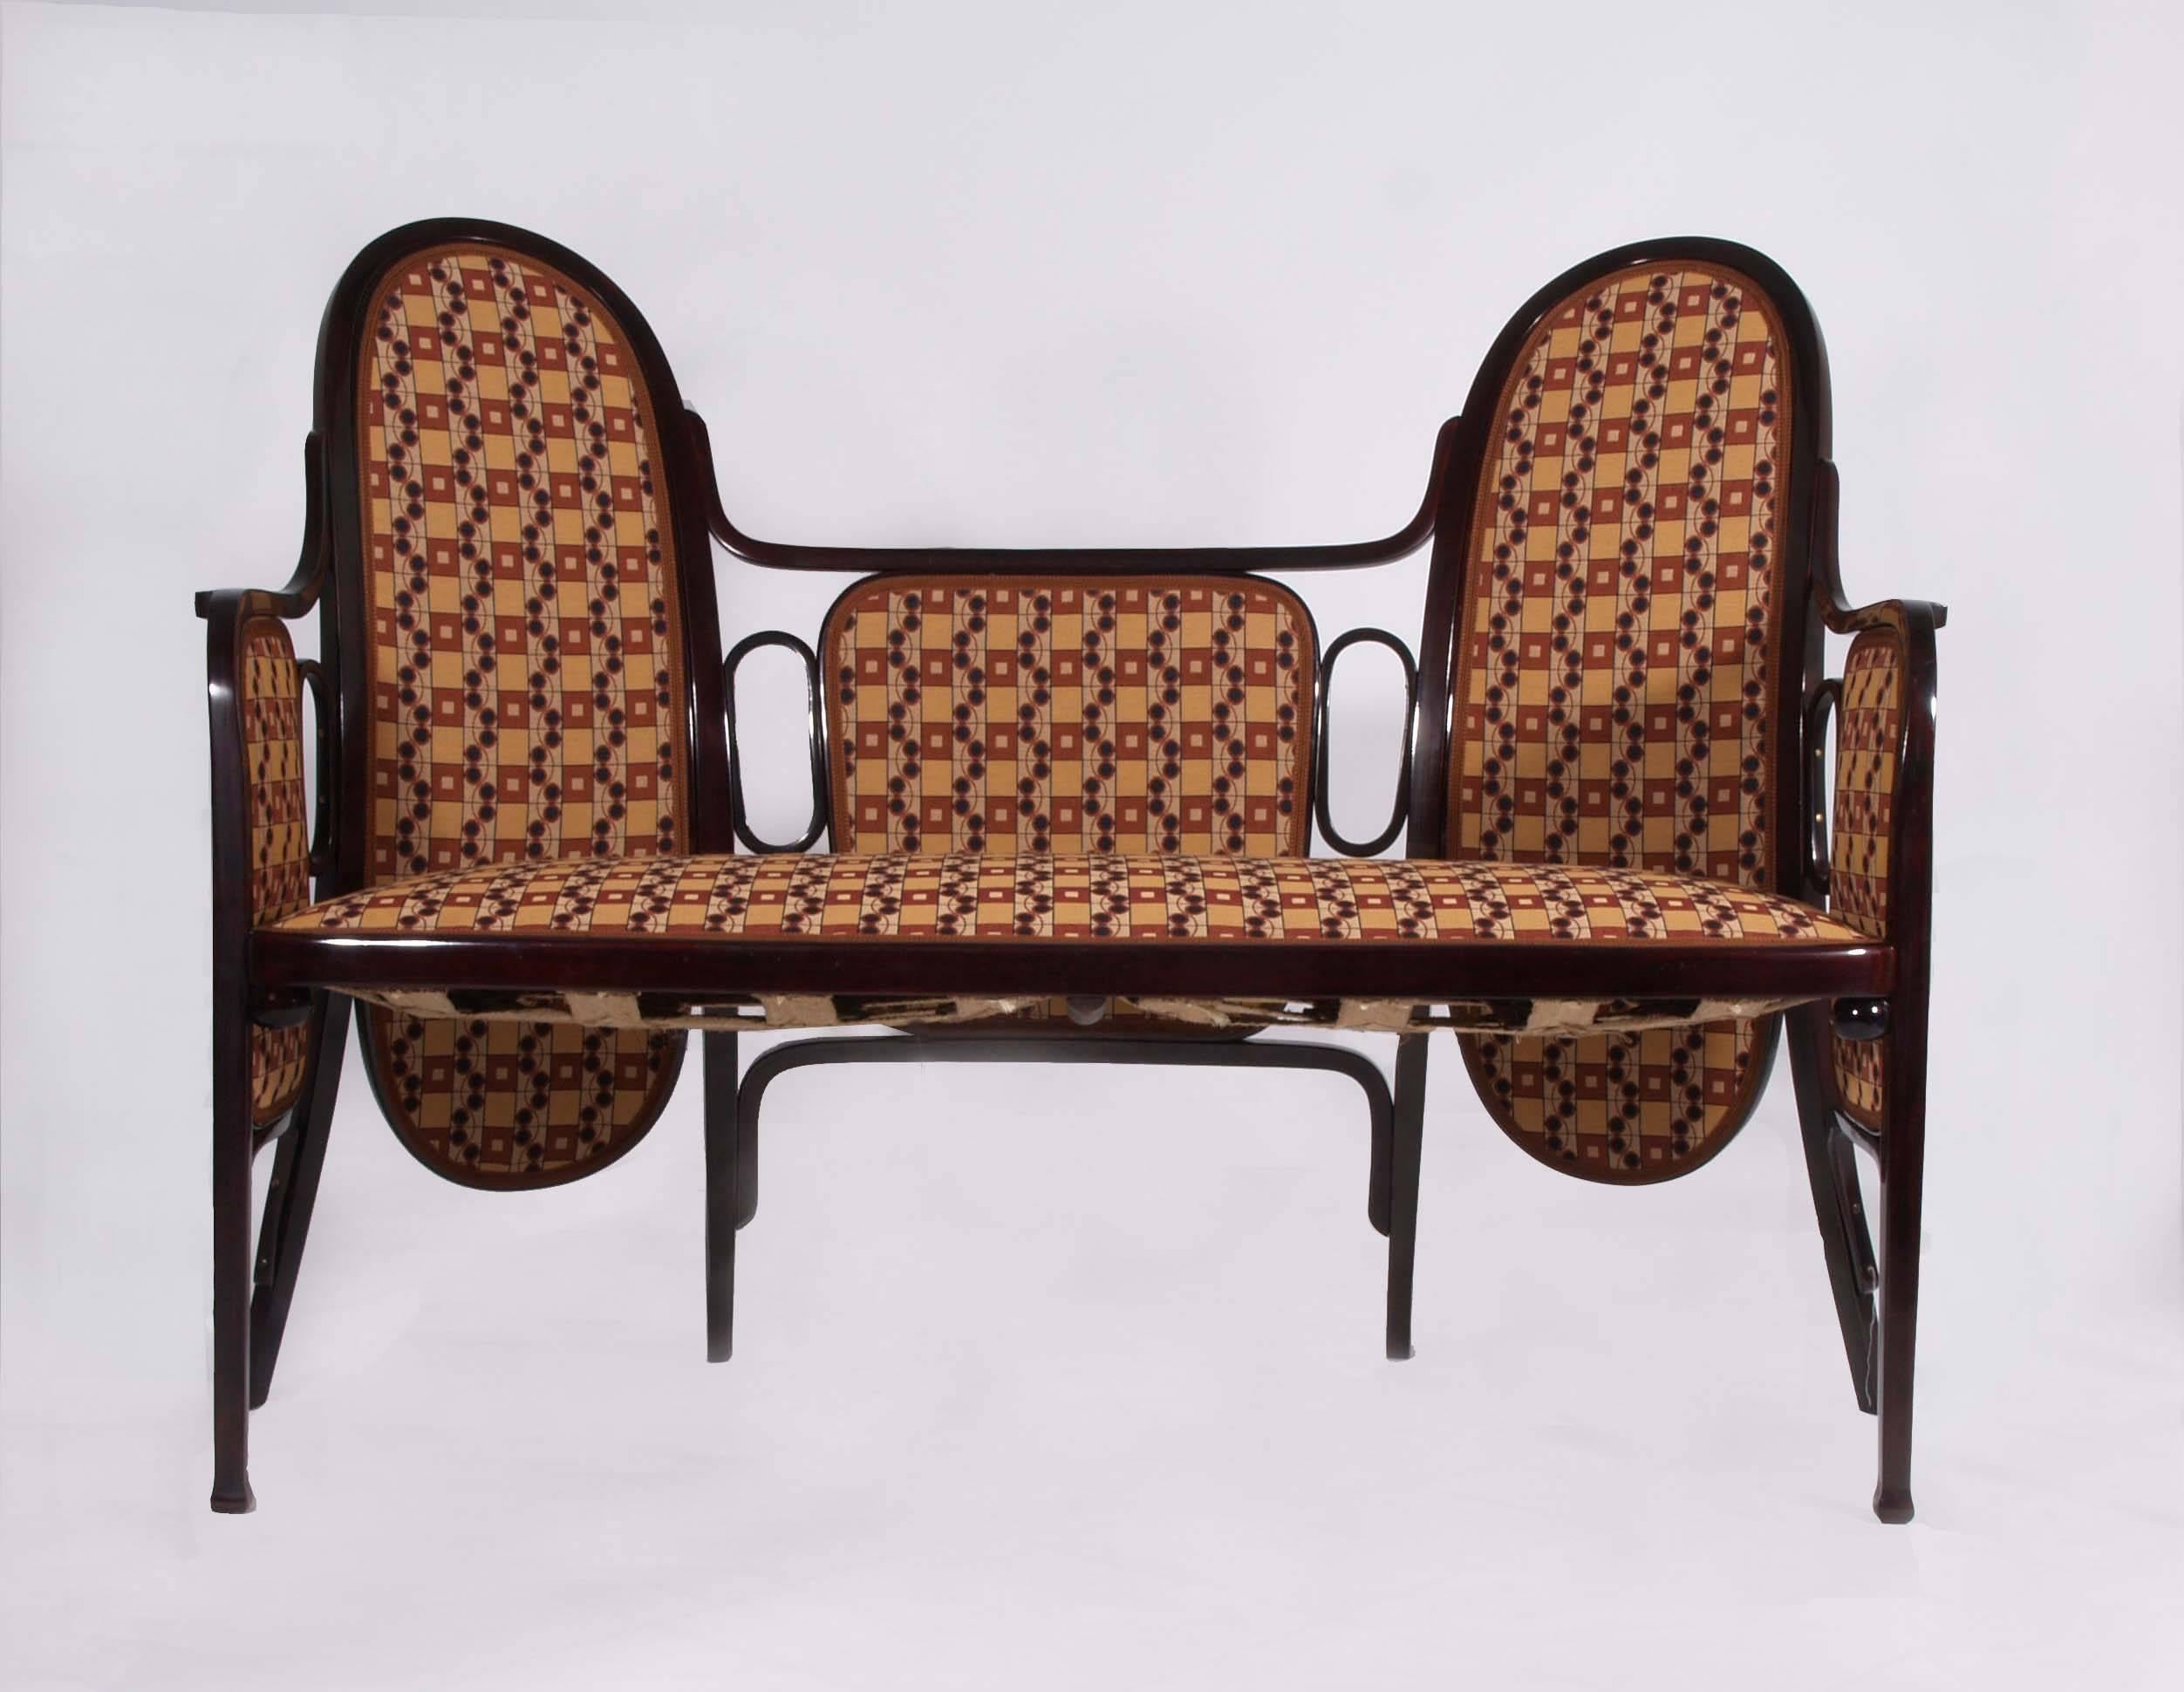 Three-seat,
Bentwood,
manufacture Thonet/Mundus,
Vienna 1905
original branding Thonet Ander the seat
new upholstery with original Backhausen fabric.
There are further bentwood furniture’s in the same style available. Please visit the Zeitloos